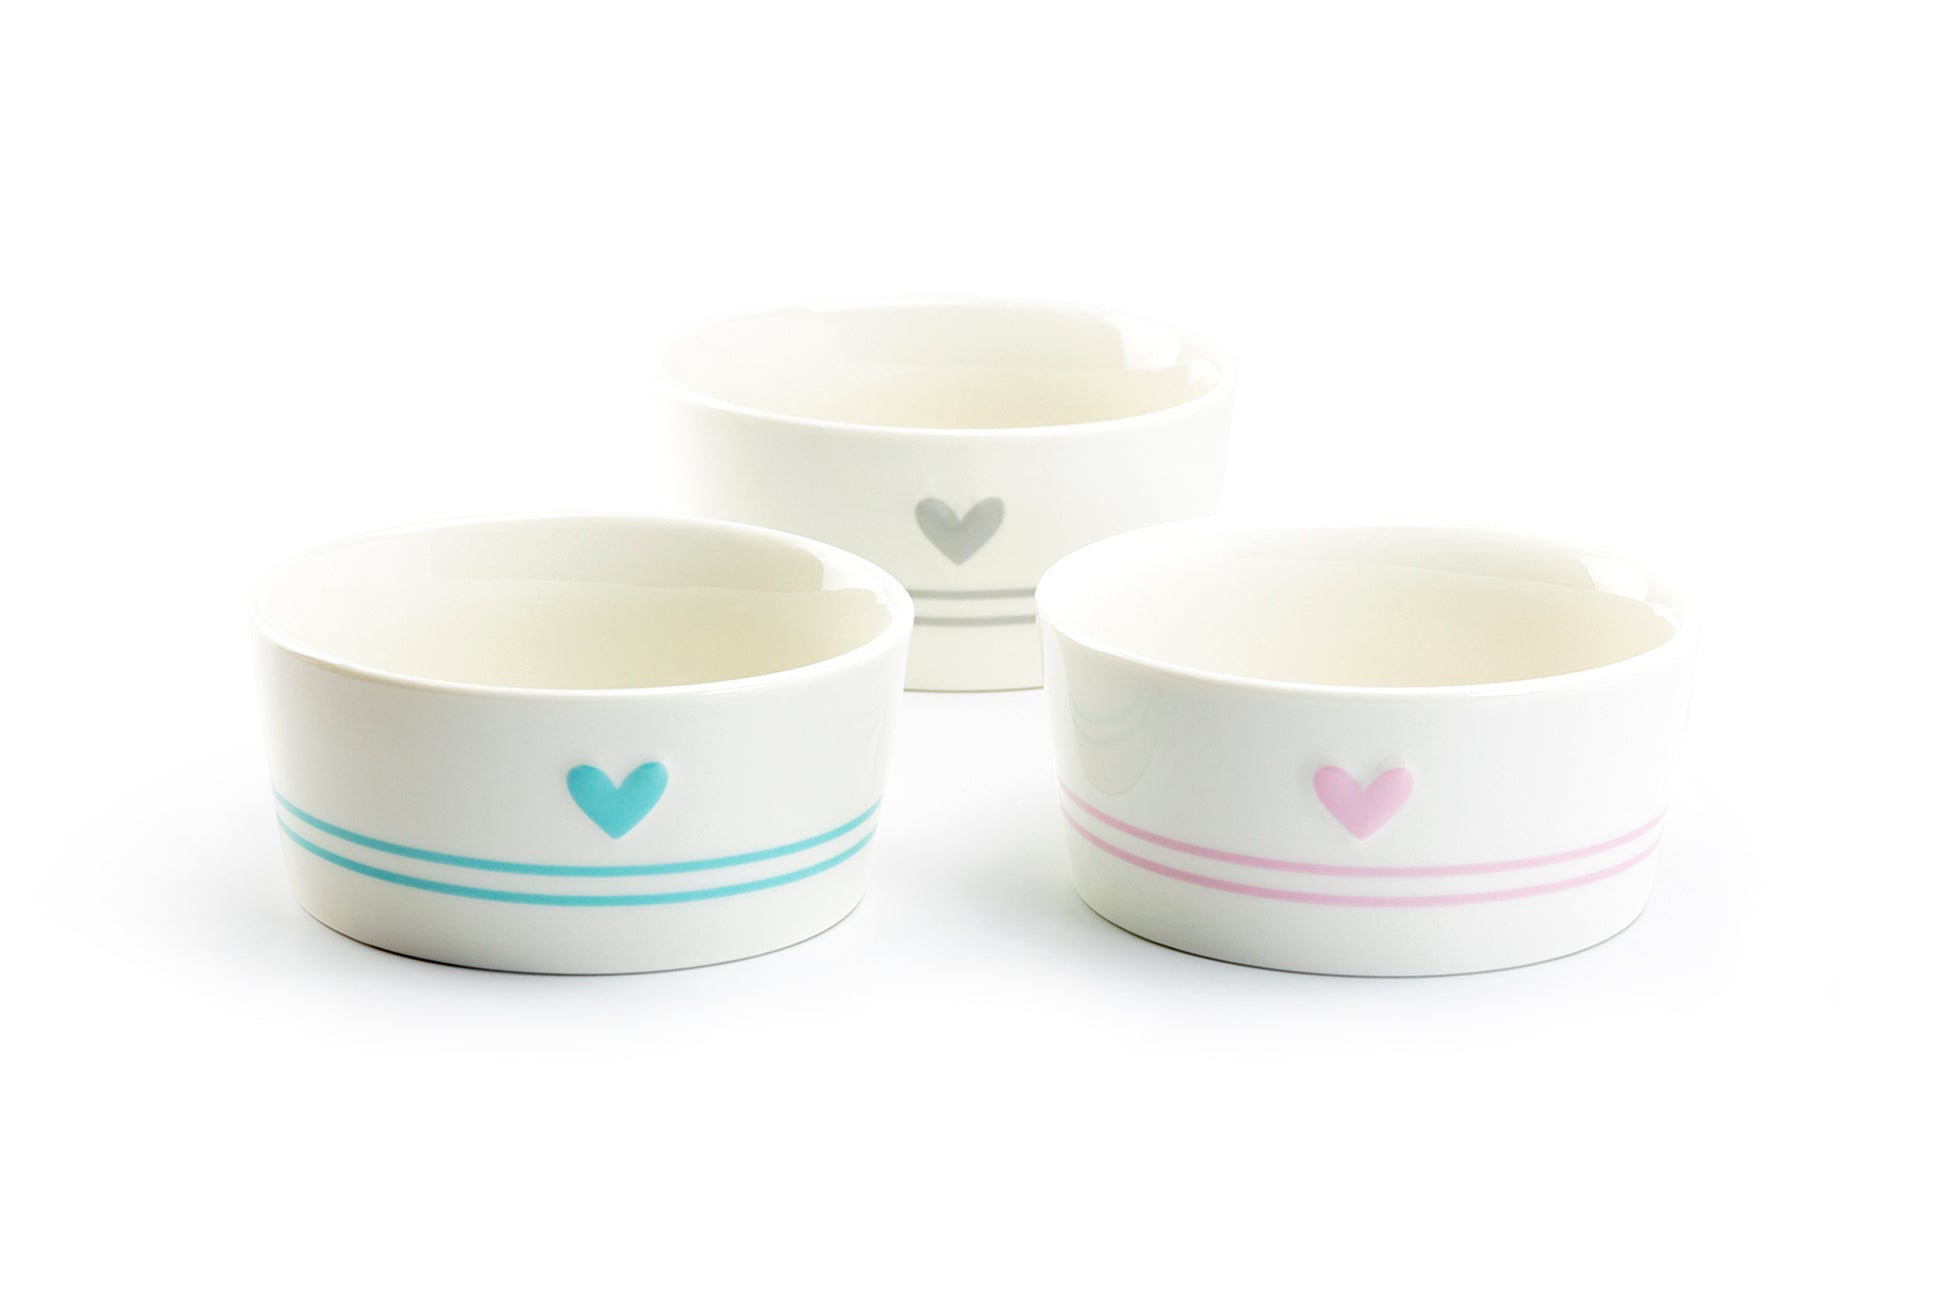 Raised Heart Ceramic Pet Bowl with Paw Print Teacup's Diner Pink Gray Turquoise